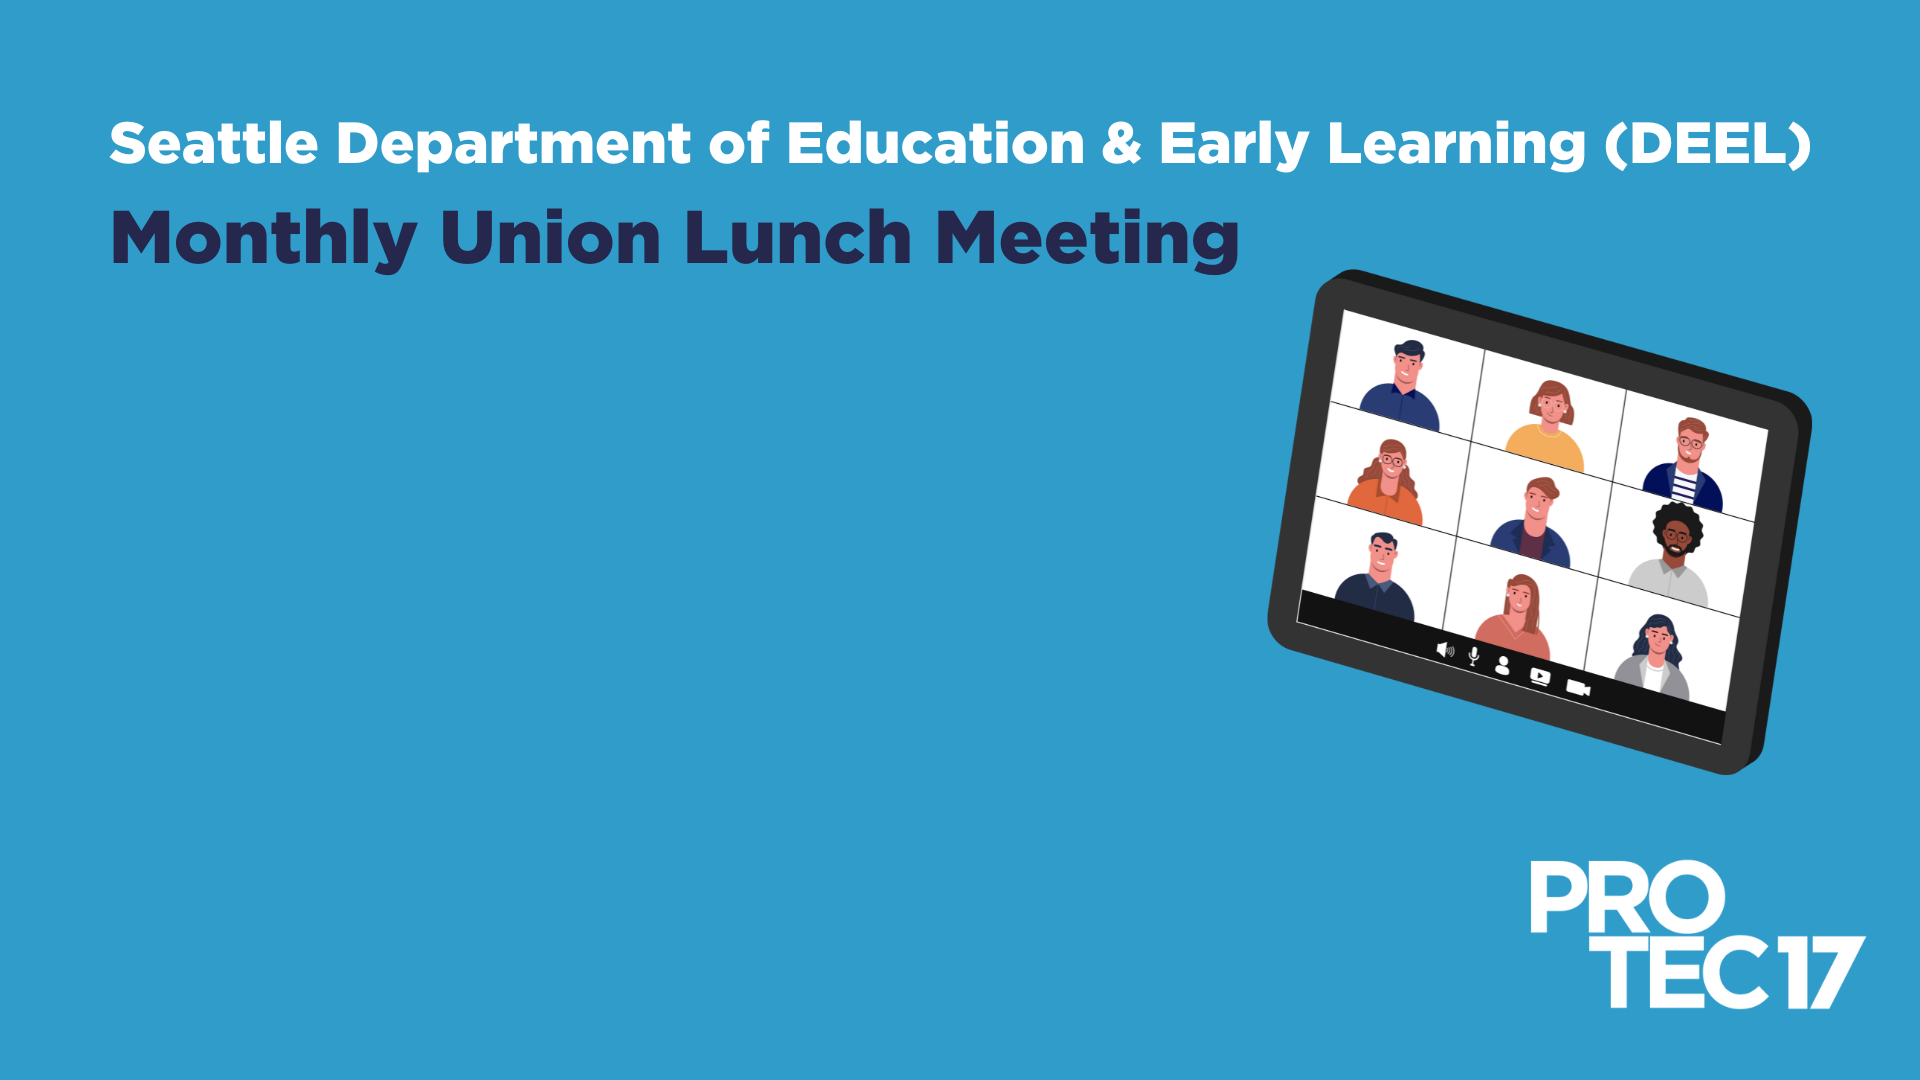 Banner image that reads, "Seattle Department of Education & Early Learning (DEEL) Monthly Union Lunch Meeting" There is a graphic of people gathering on a virtual meeting and the PROTEC17 logo in the bottom right corner.